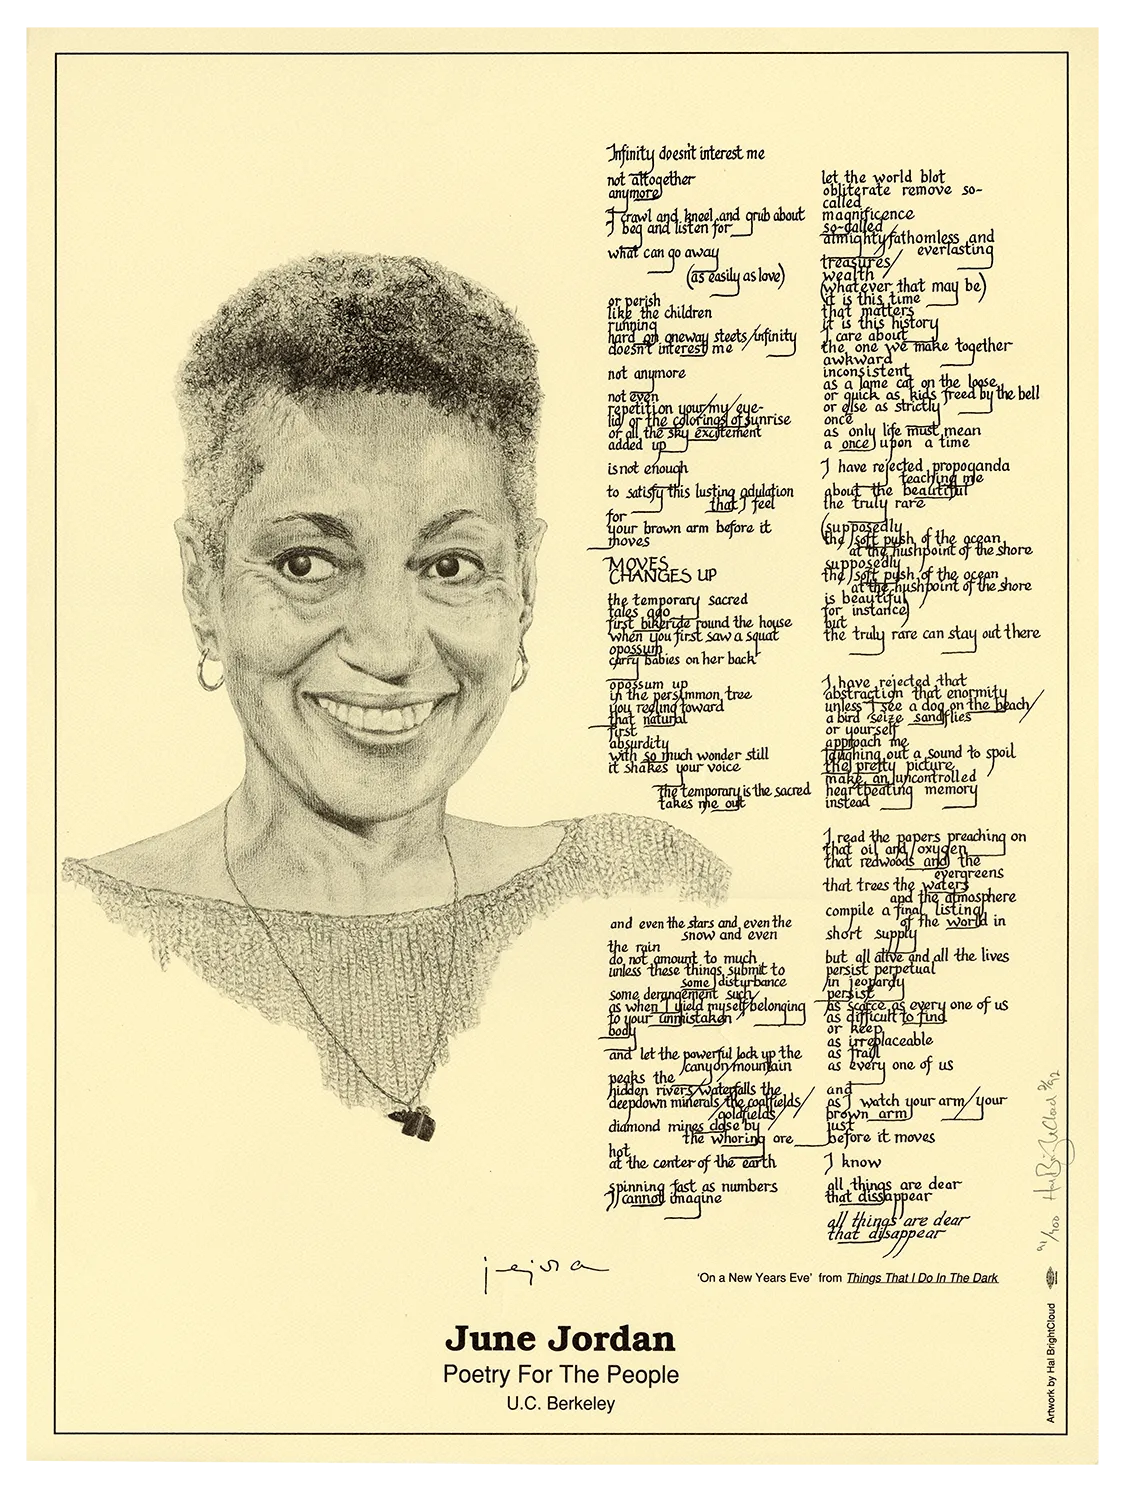 A large white poster with a pencil illustration of June Jordan smiling and handwritten text on the right.